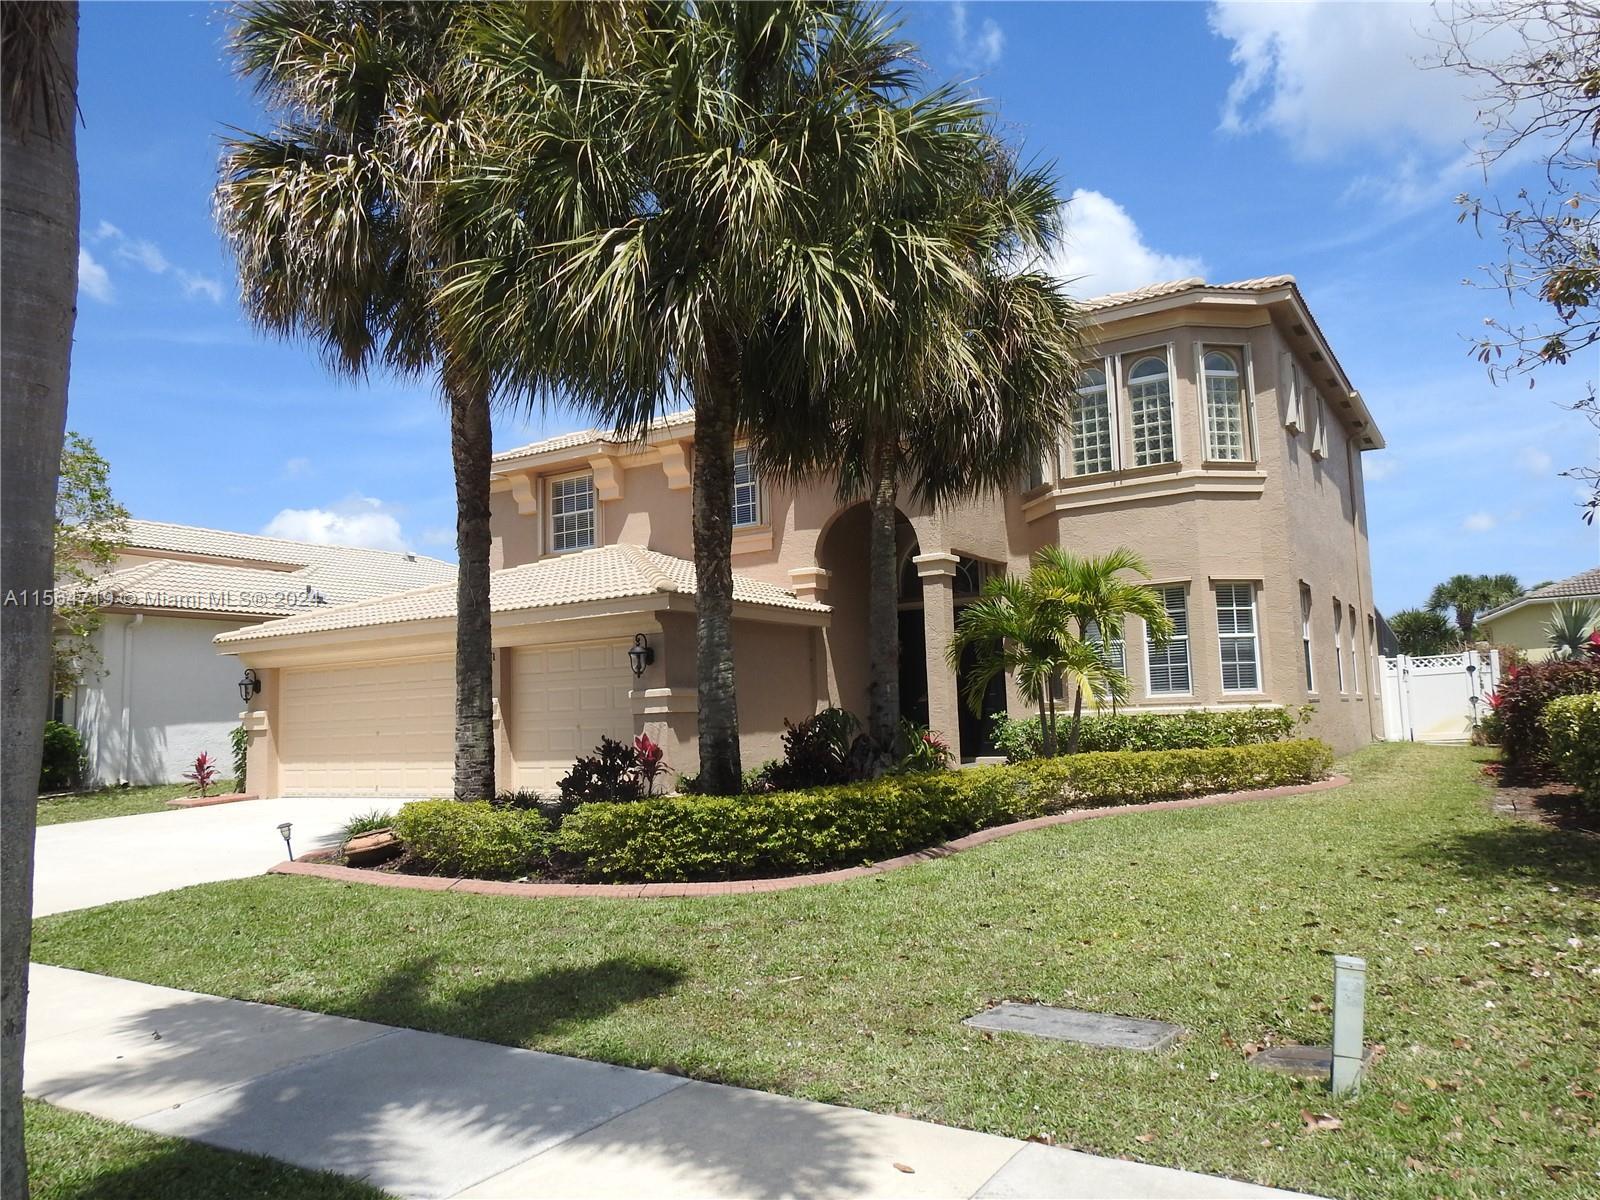 Photo of 2131 Bellcrest Ct in Royal Palm Beach, FL